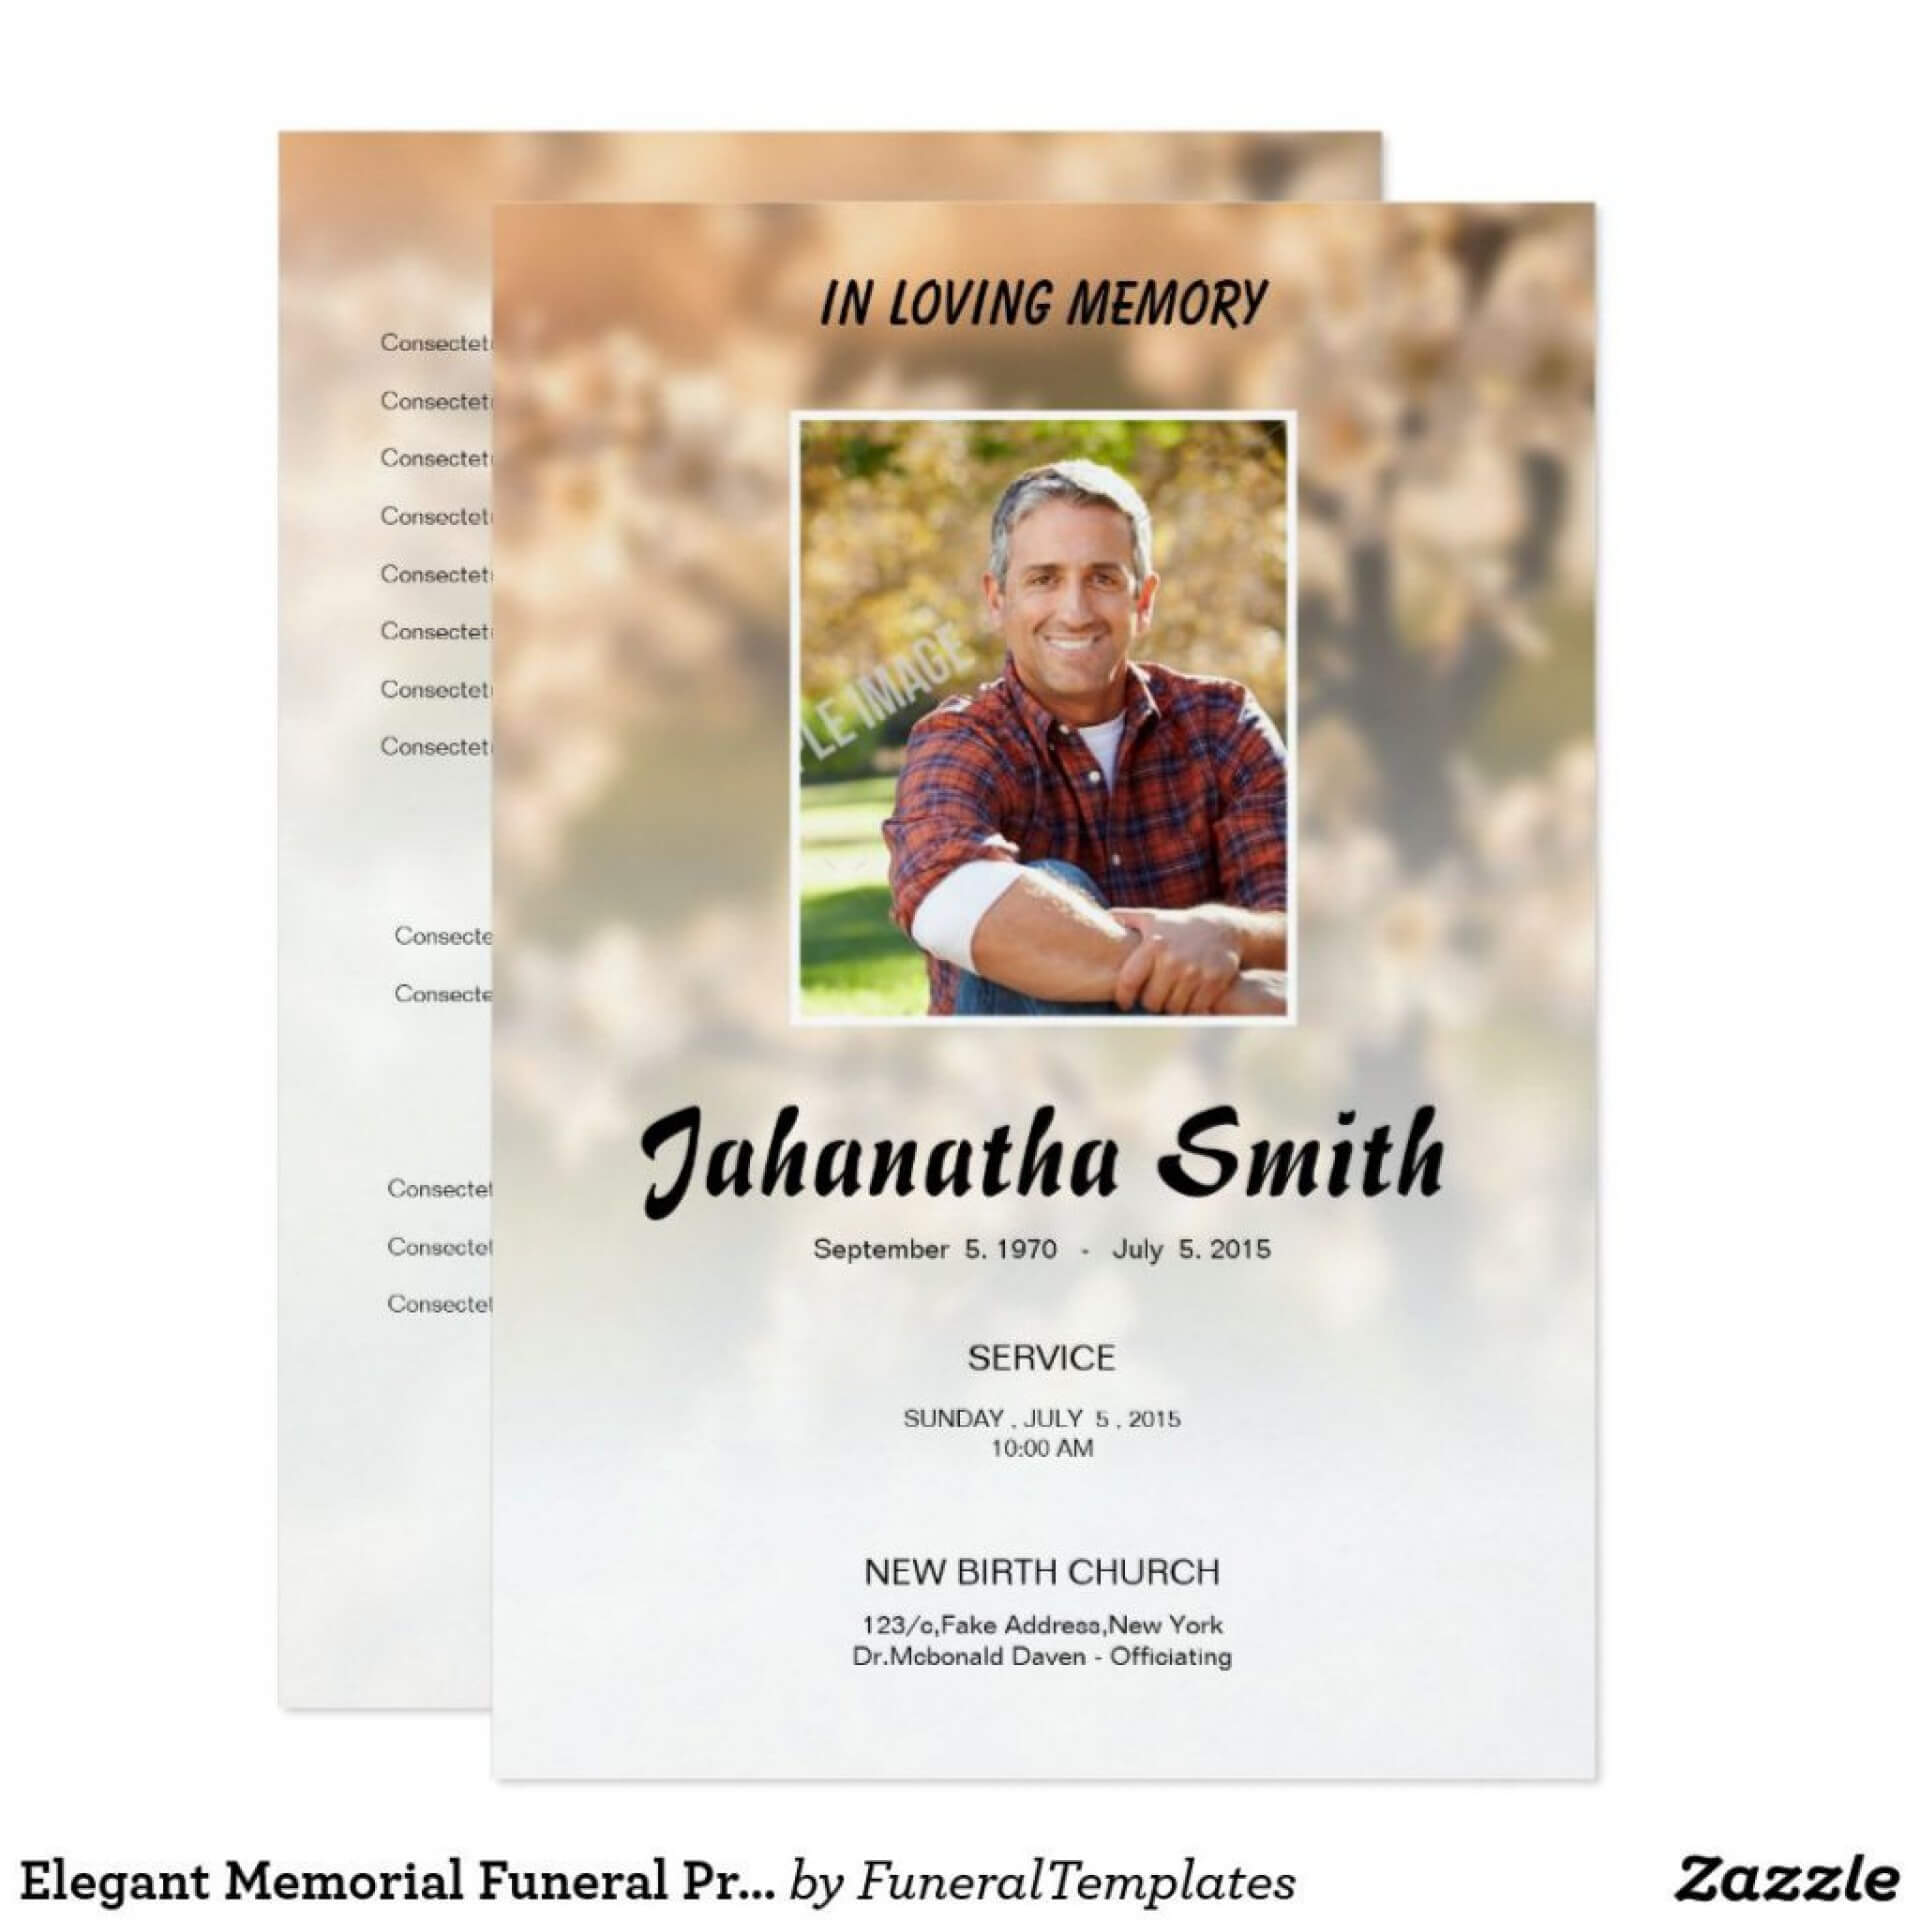 029 Template Ideas Free Memorial Cards Card Download Pertaining To Memorial Cards For Funeral Template Free